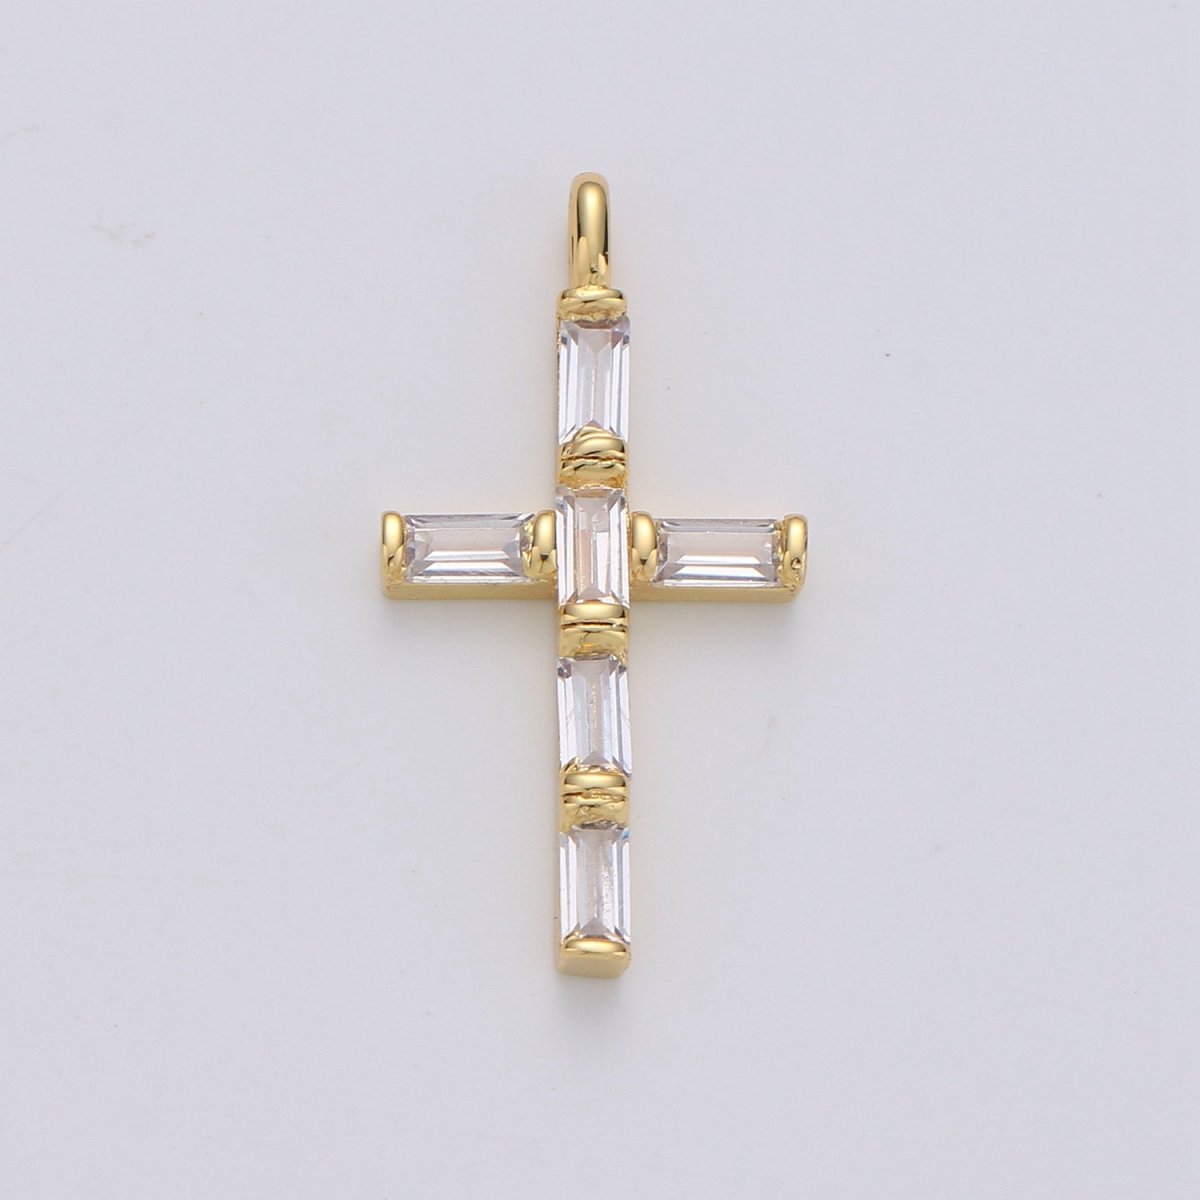 Cubic Zirconia CZ Marquise Navette Crystal Small Cross Pendant Charm Chain Necklace in 14k Gold Filled Silver Cross Charm Religious Jewelry I-657 I-658 - DLUXCA